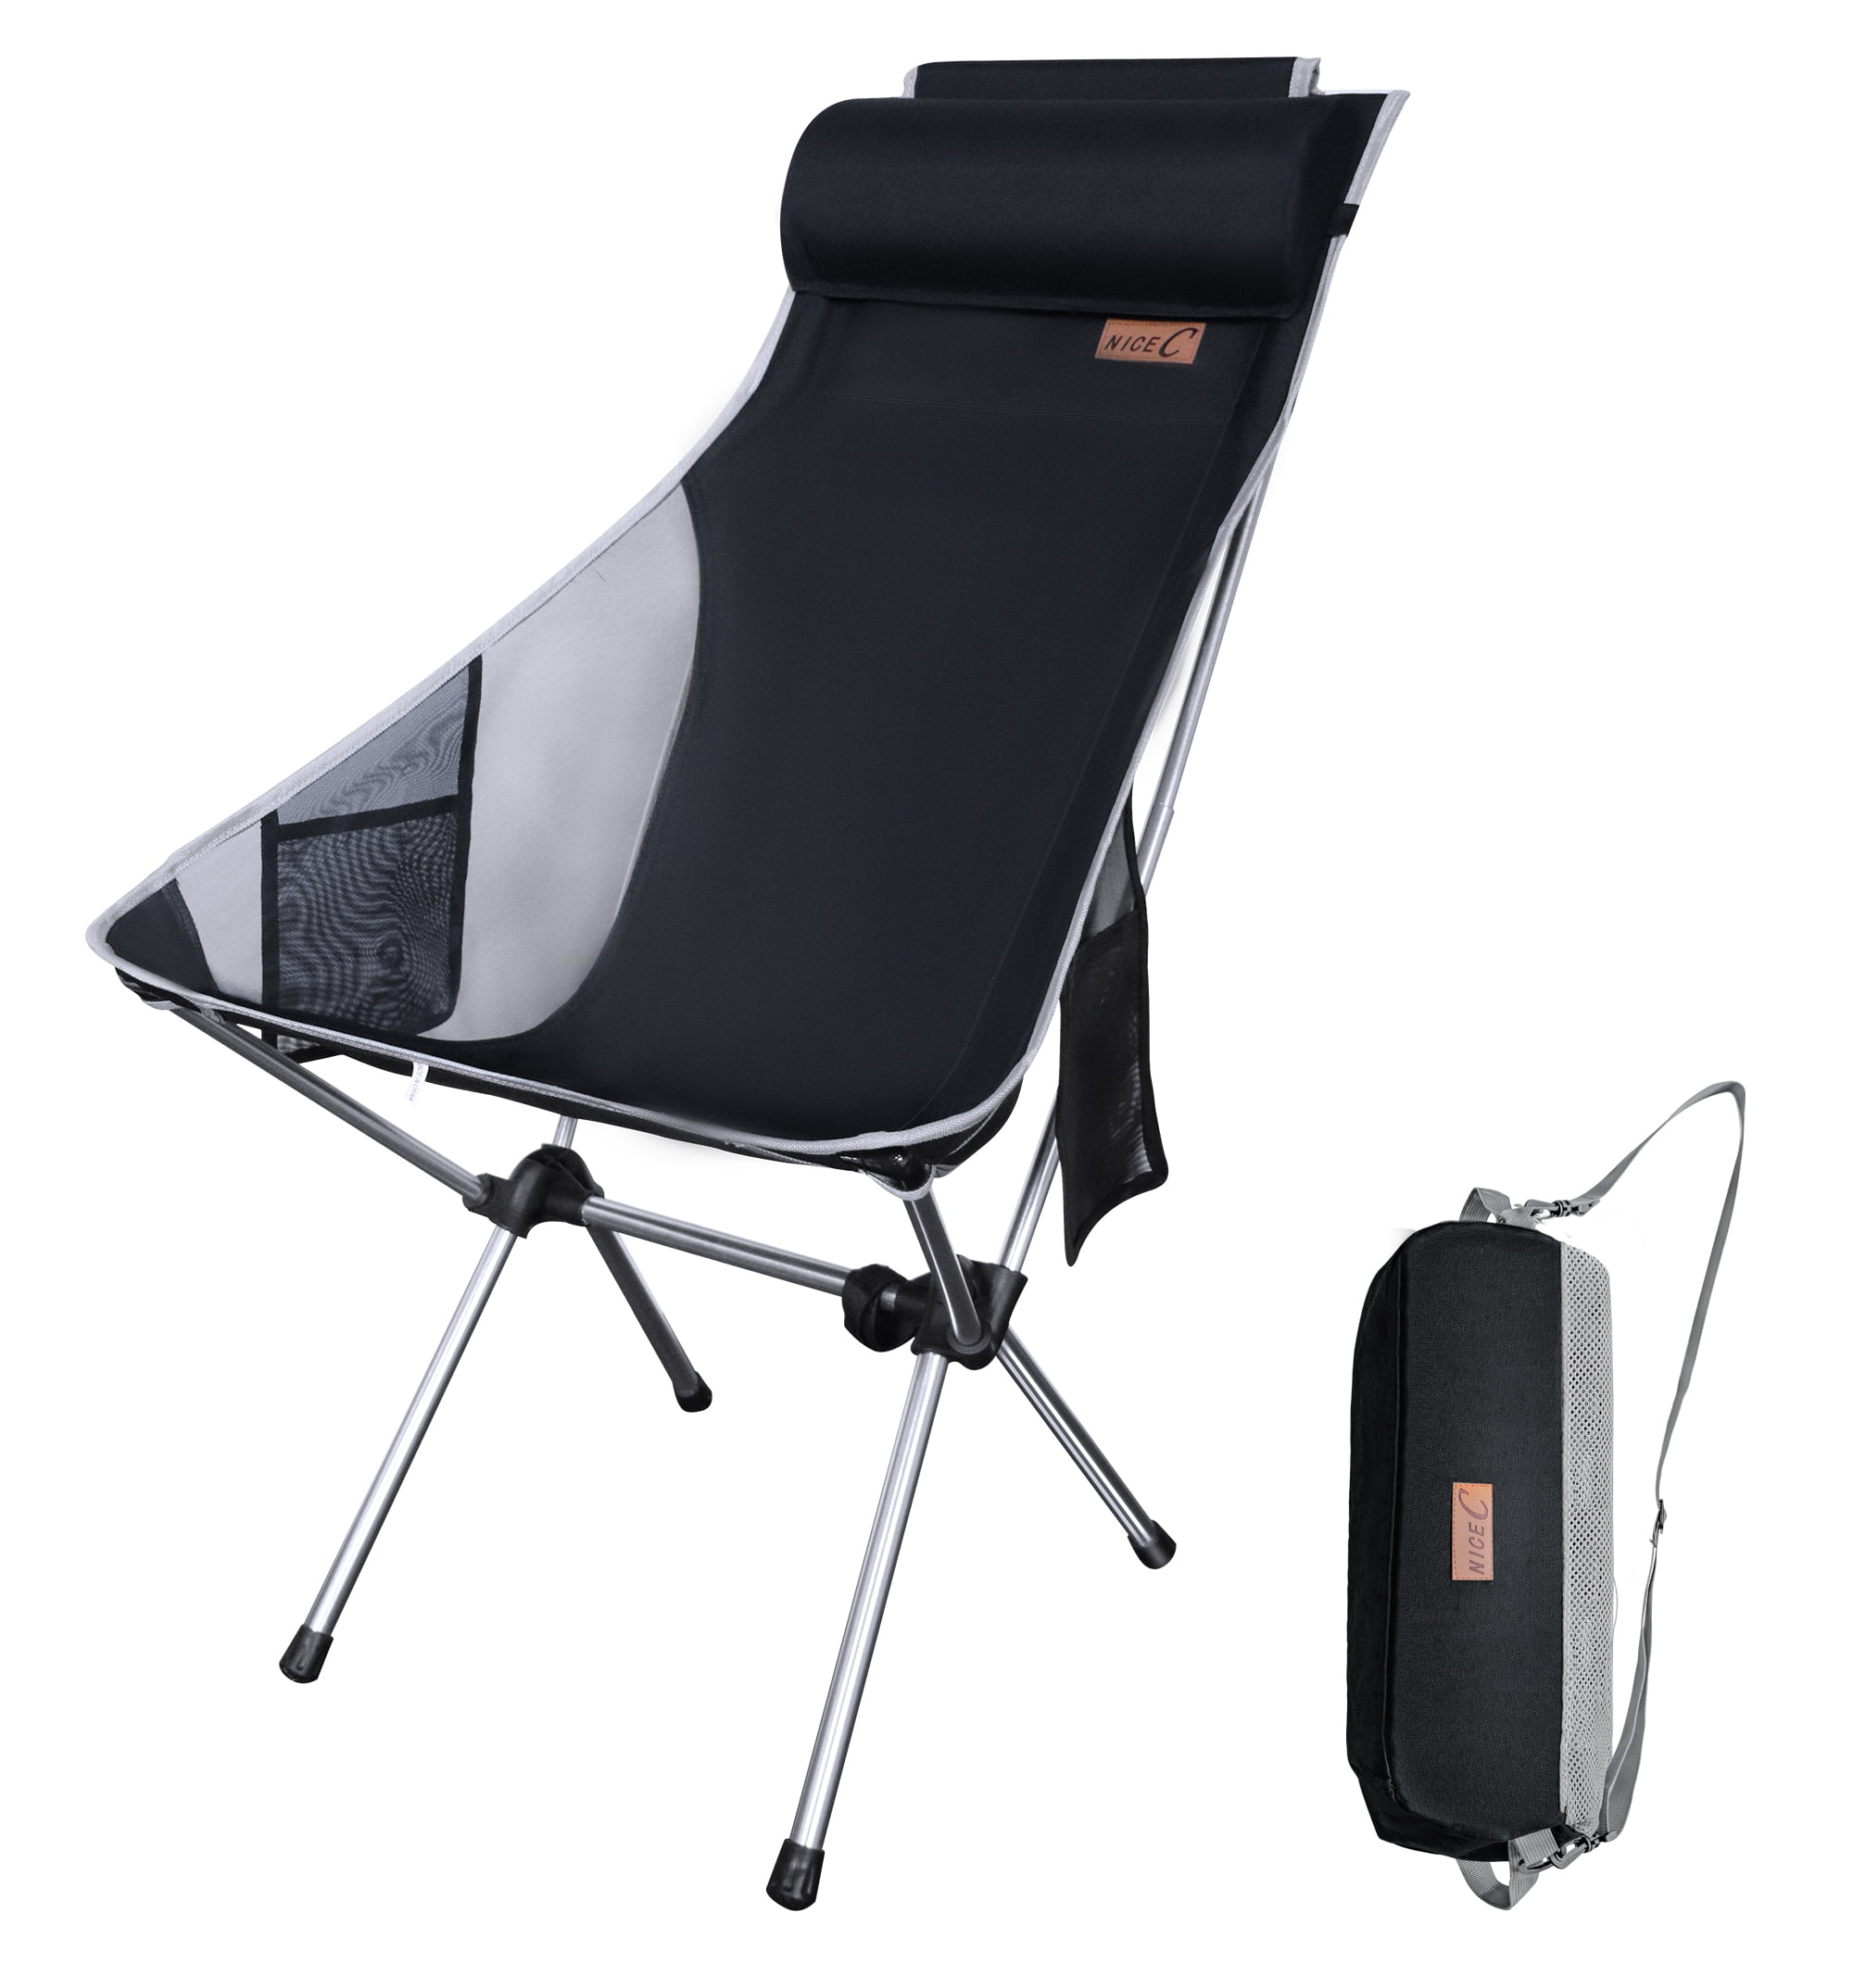 NiceC Ultralight High Back Folding Camping Chair, with Headrest, Outdoor,  Backpacking Compact & Heavy Duty Outdoor, Camping, BBQ, Beach, Travel,  Picnic, Festival with Carry Bag (1 Pack of Black) - Walmart.com